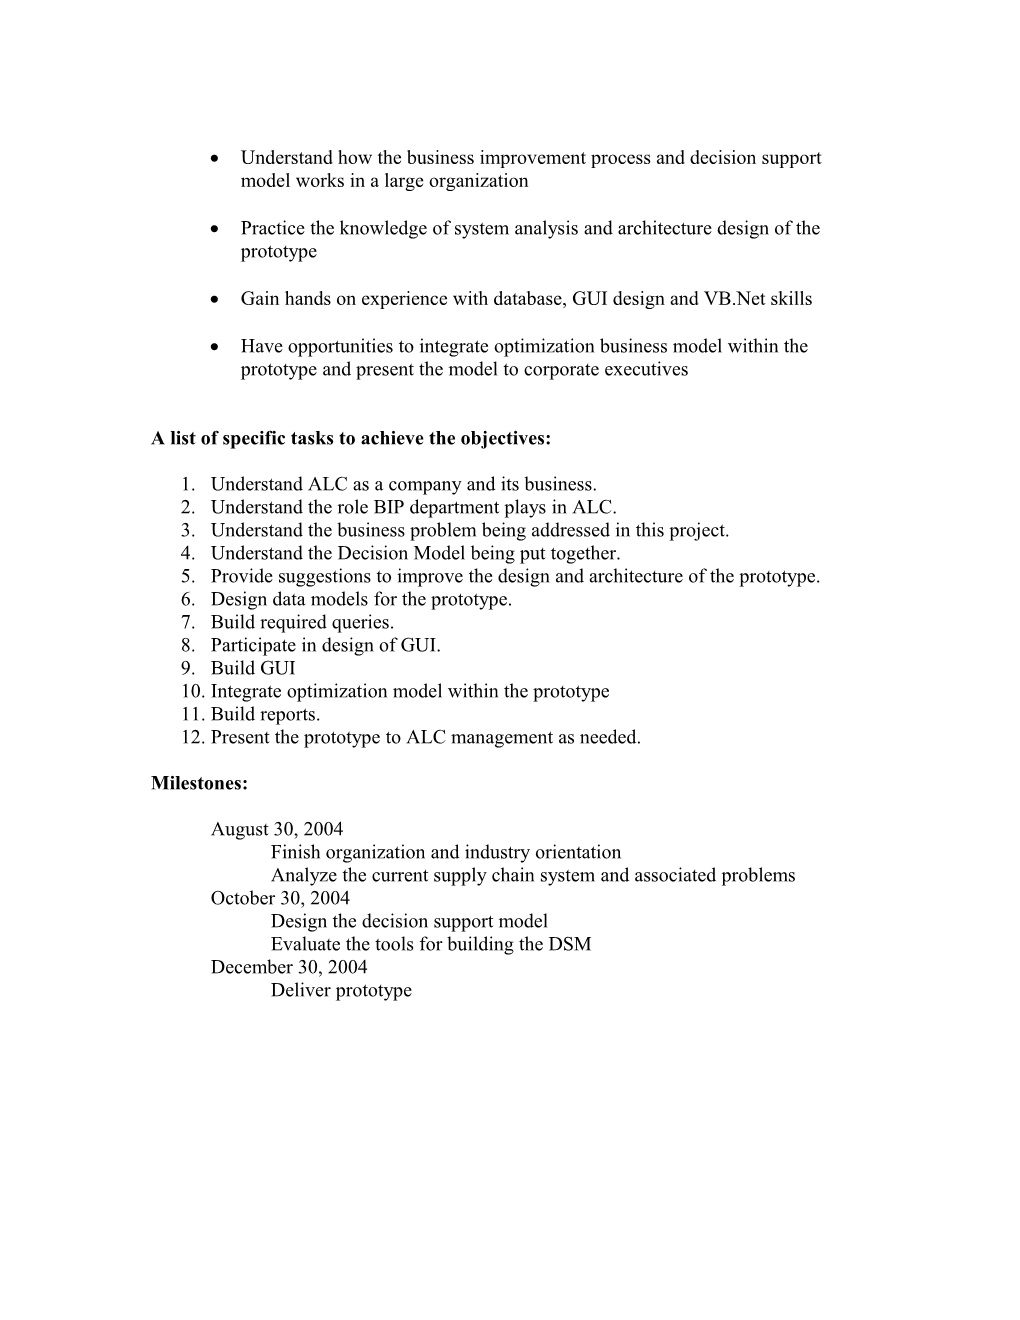 Internship Outline and Objectives